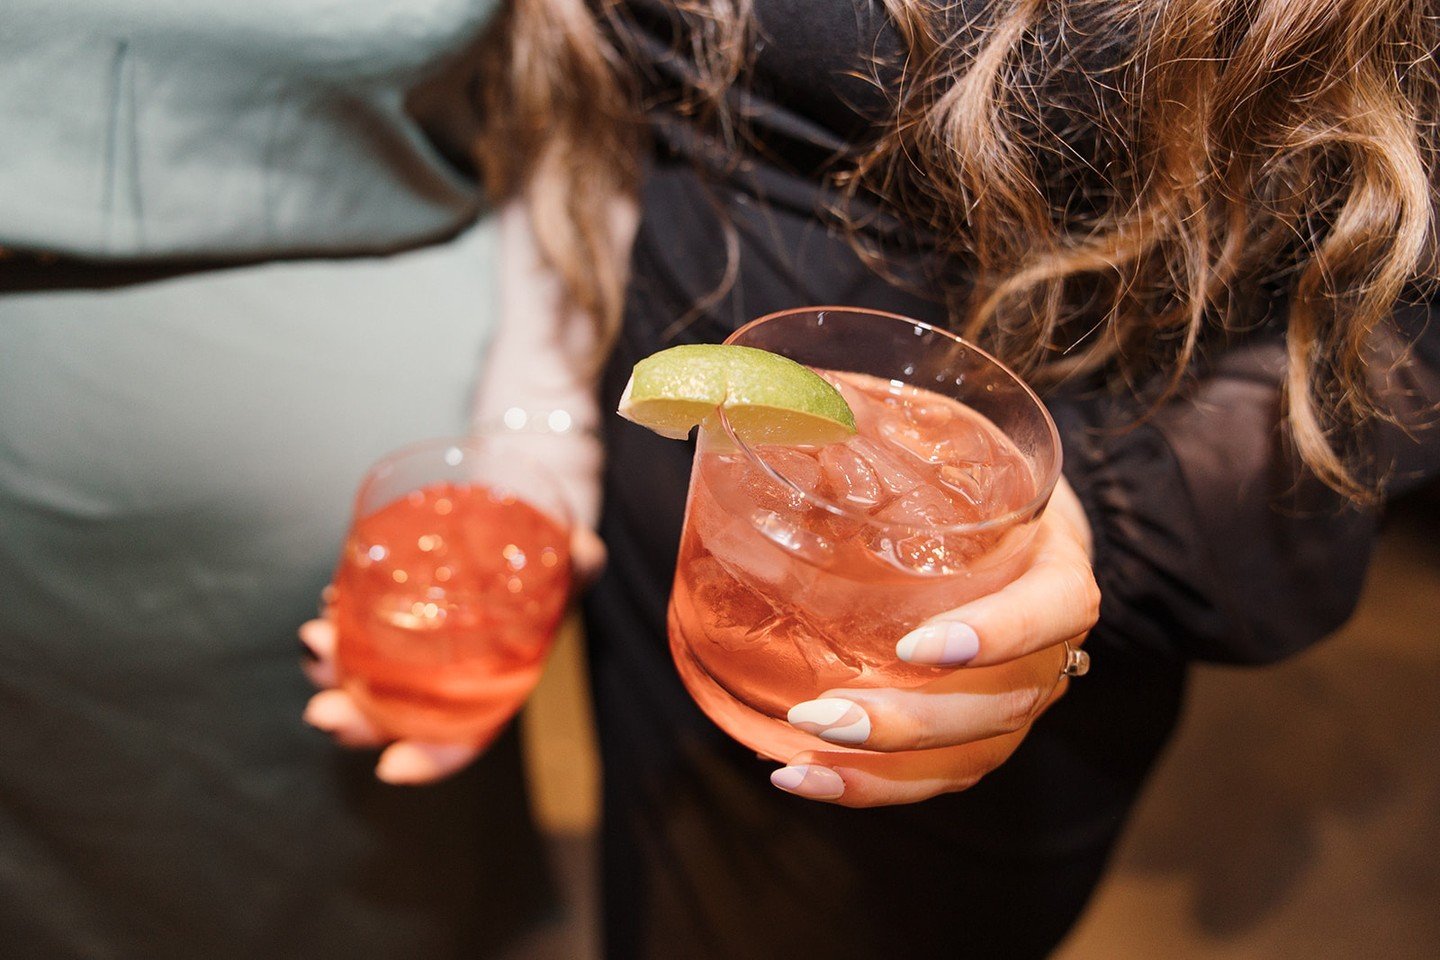 A celebratory weekend cocktail with friends is what gets us through the week 🍹😋

📸 @nicoledonnellyphoto
.
.
.
#lmcaters #chicagocatering #margaritas #chicagoeventplanning #margarita #cocktailhour #cateringchicago #chicagoevents #eventcatering #eve